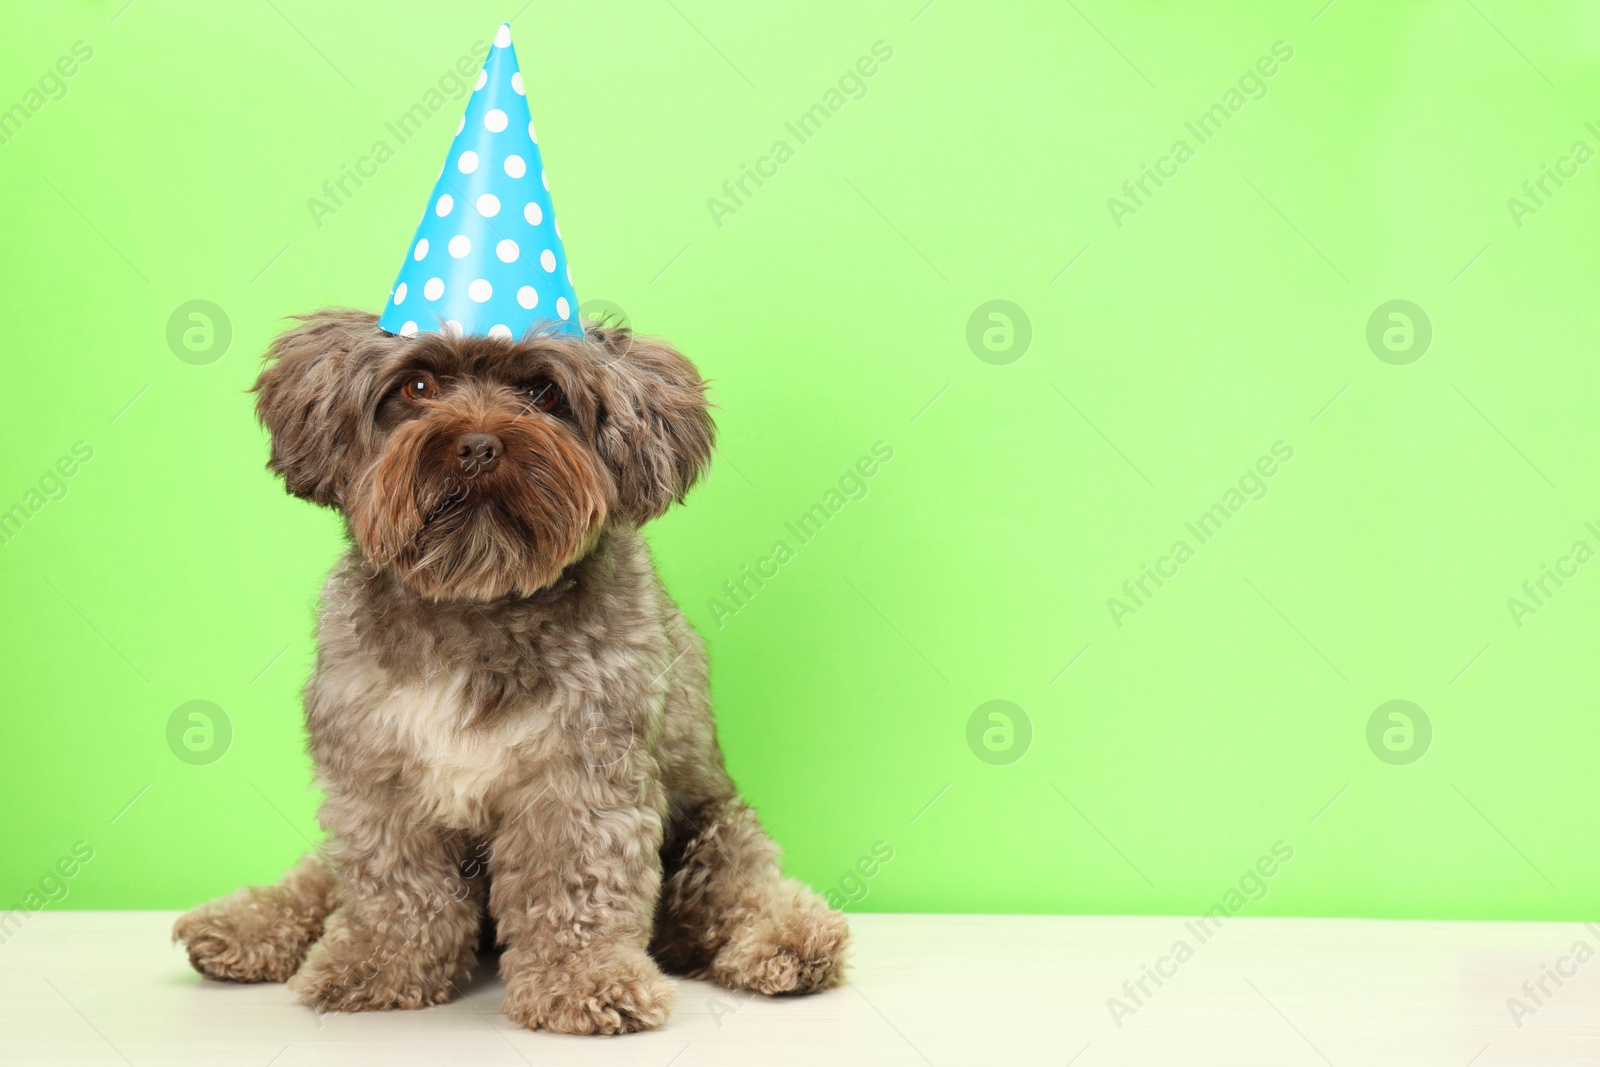 Photo of Cute Maltipoo dog wearing party hat on white table against green background, space for text. Lovely pet